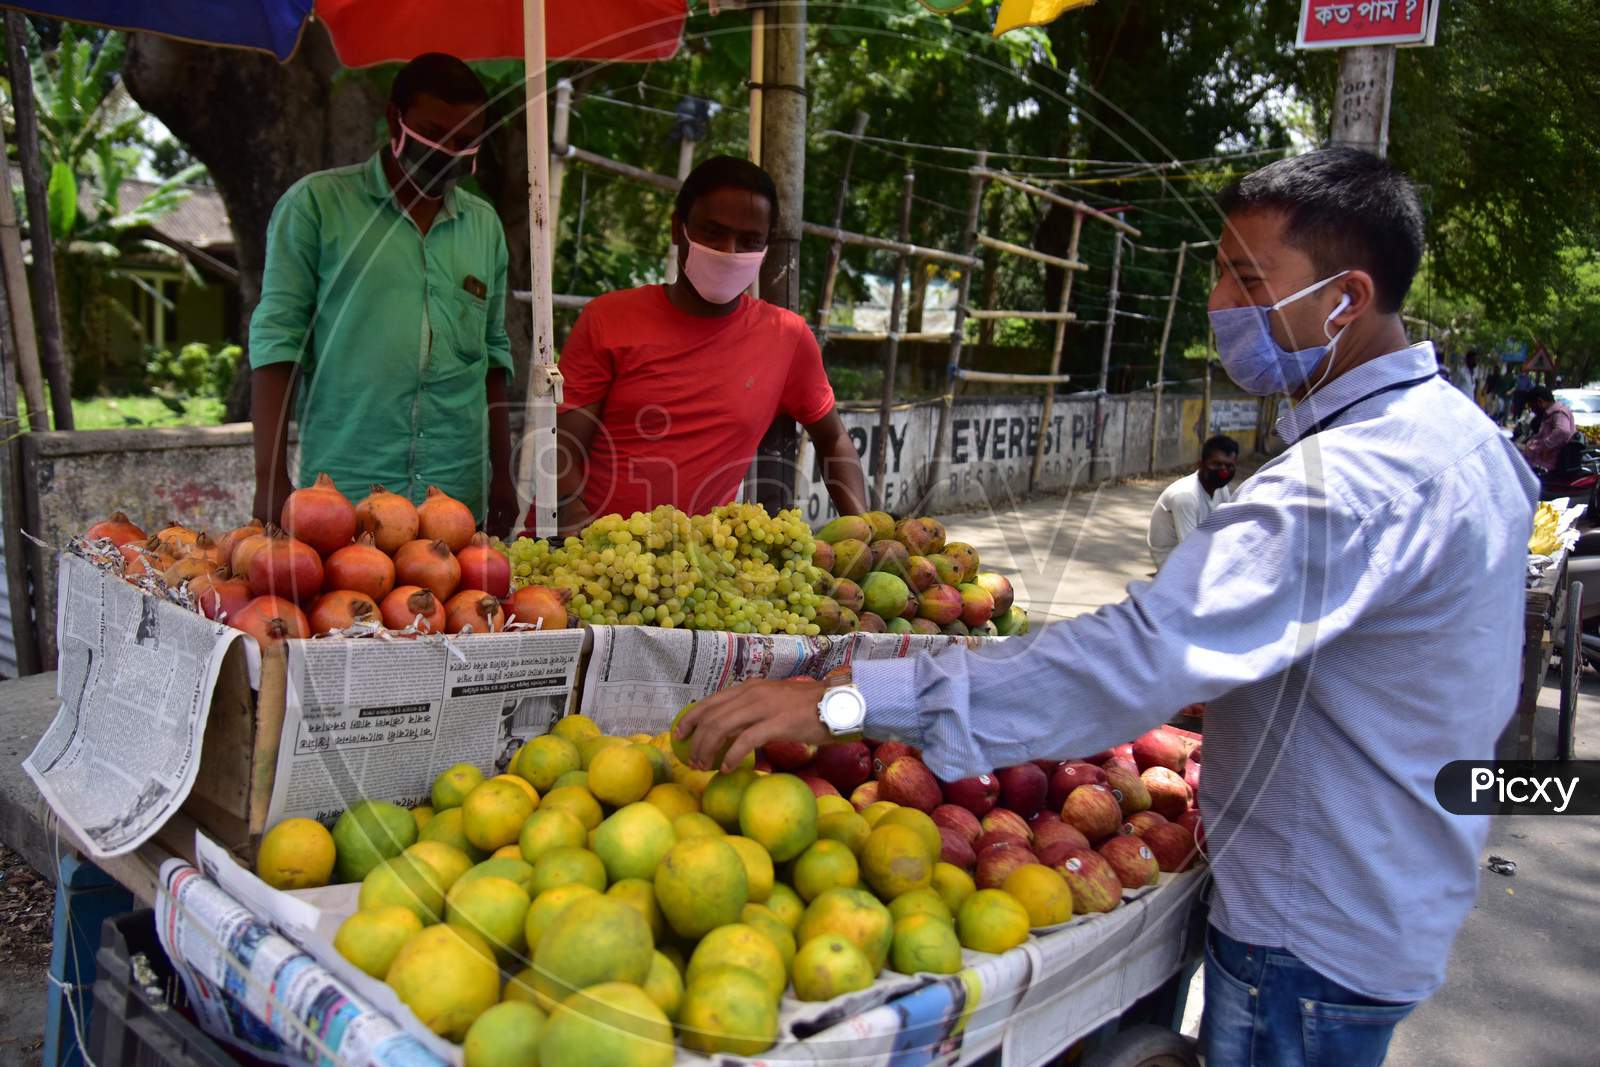 Nagaon :Vendor Sale Fruits  After Authorities Allowed Sale  With Certain Restrictions, During The Ongoing Covid-19 Nationwide Lockdown In Nagaon District Of Assam On May 04,2020 .Pix By Anuwar Hazarika